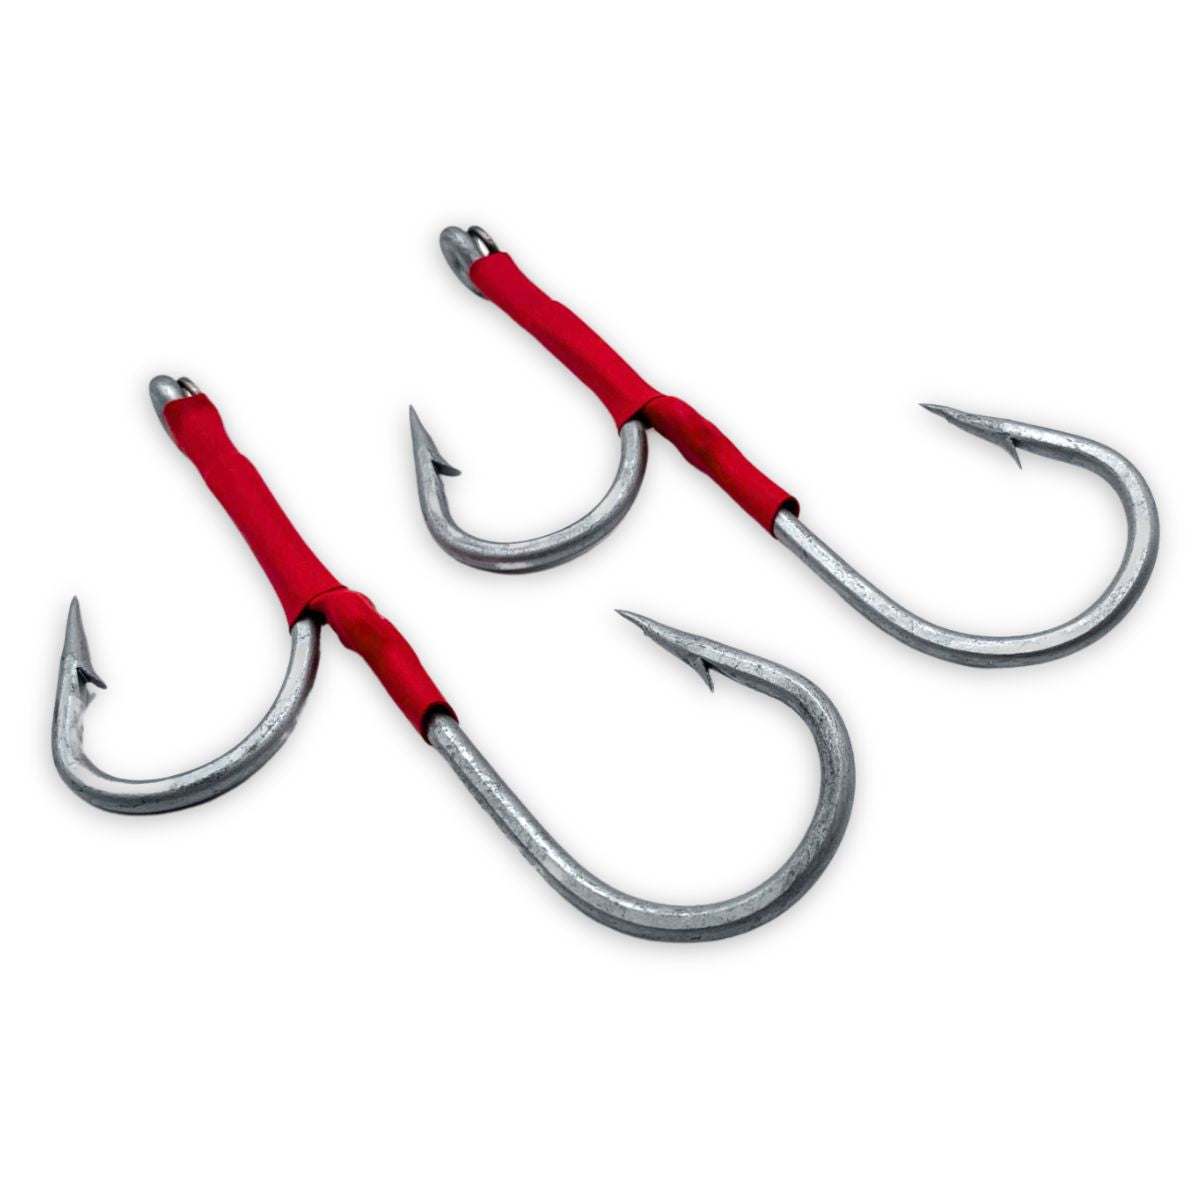 Kamikaze - Twin Pack | Double Assist Hook Rigs | 400lb wire : Size 8/0 - South East Clearance Centre